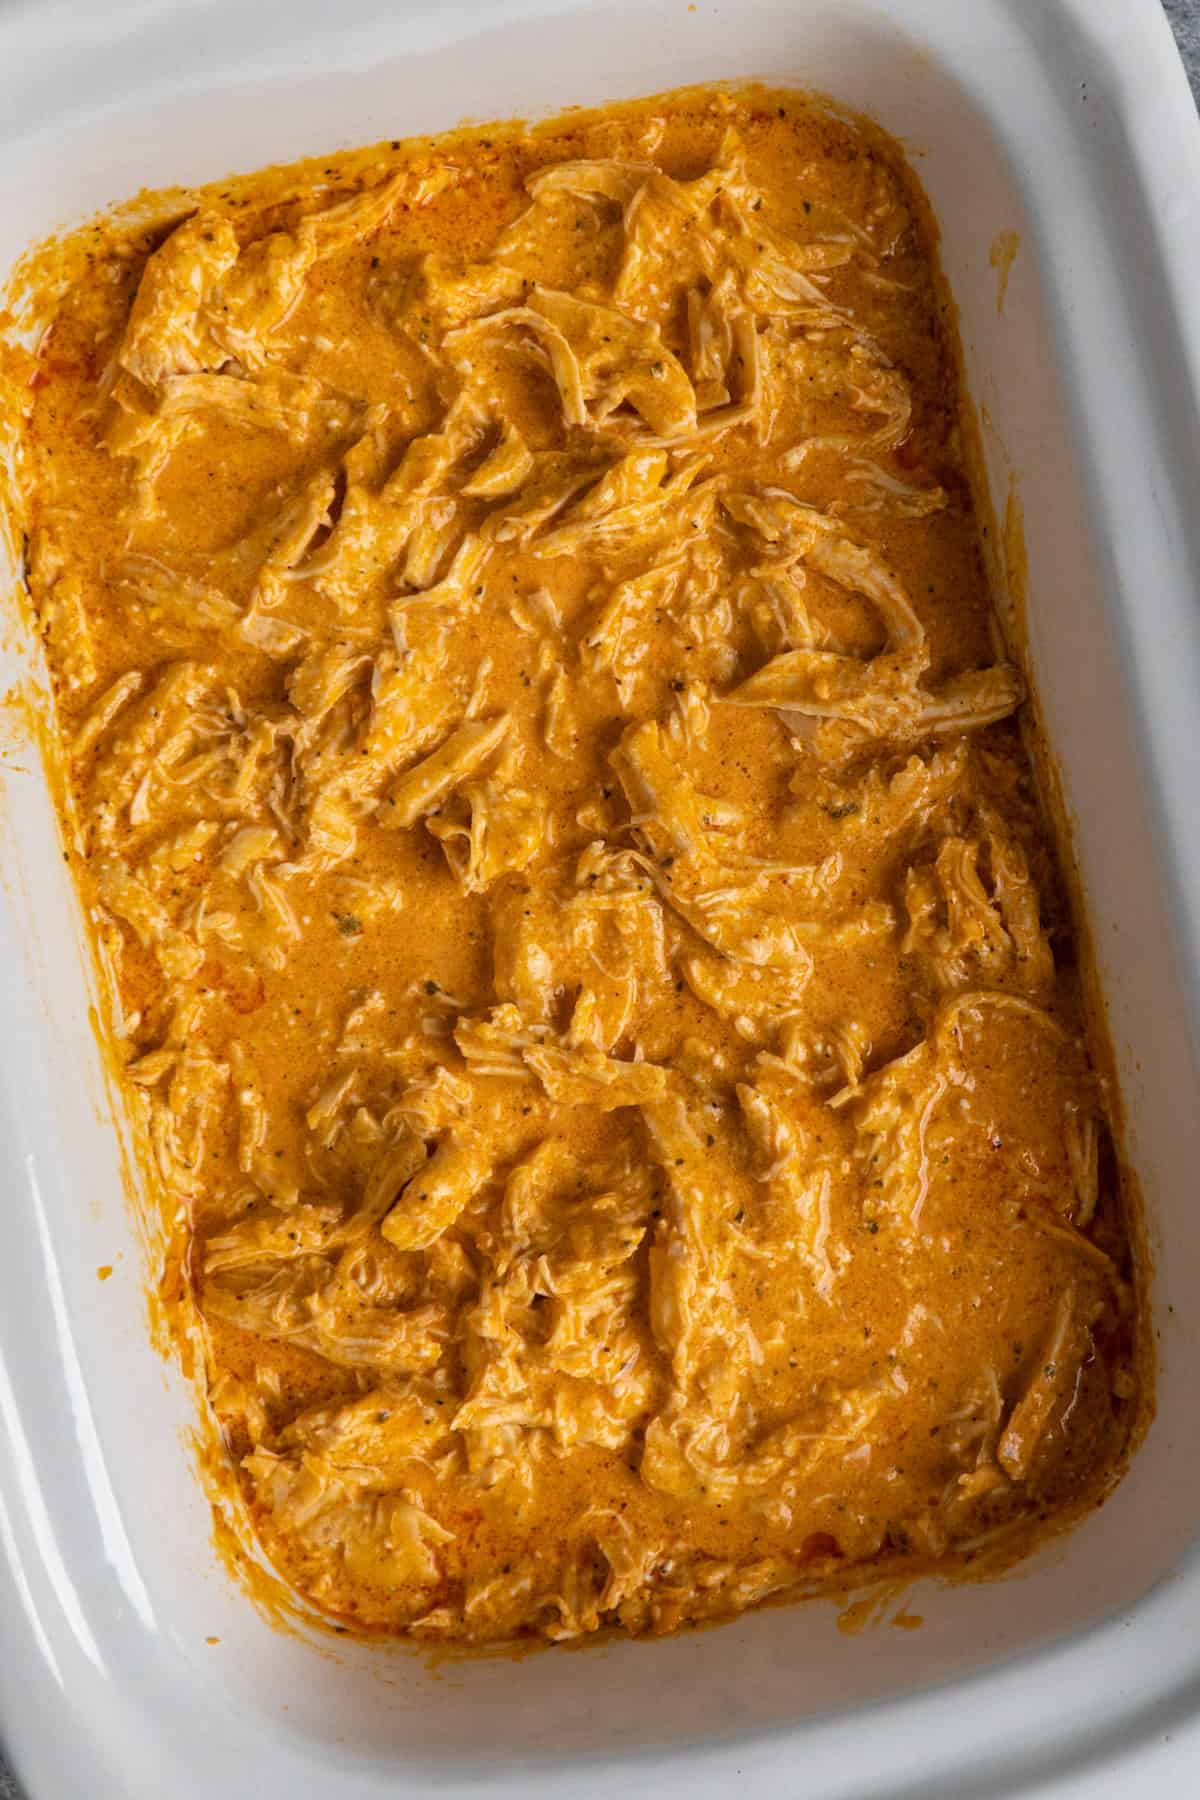 Buffalo chicken in a white slow cooker.